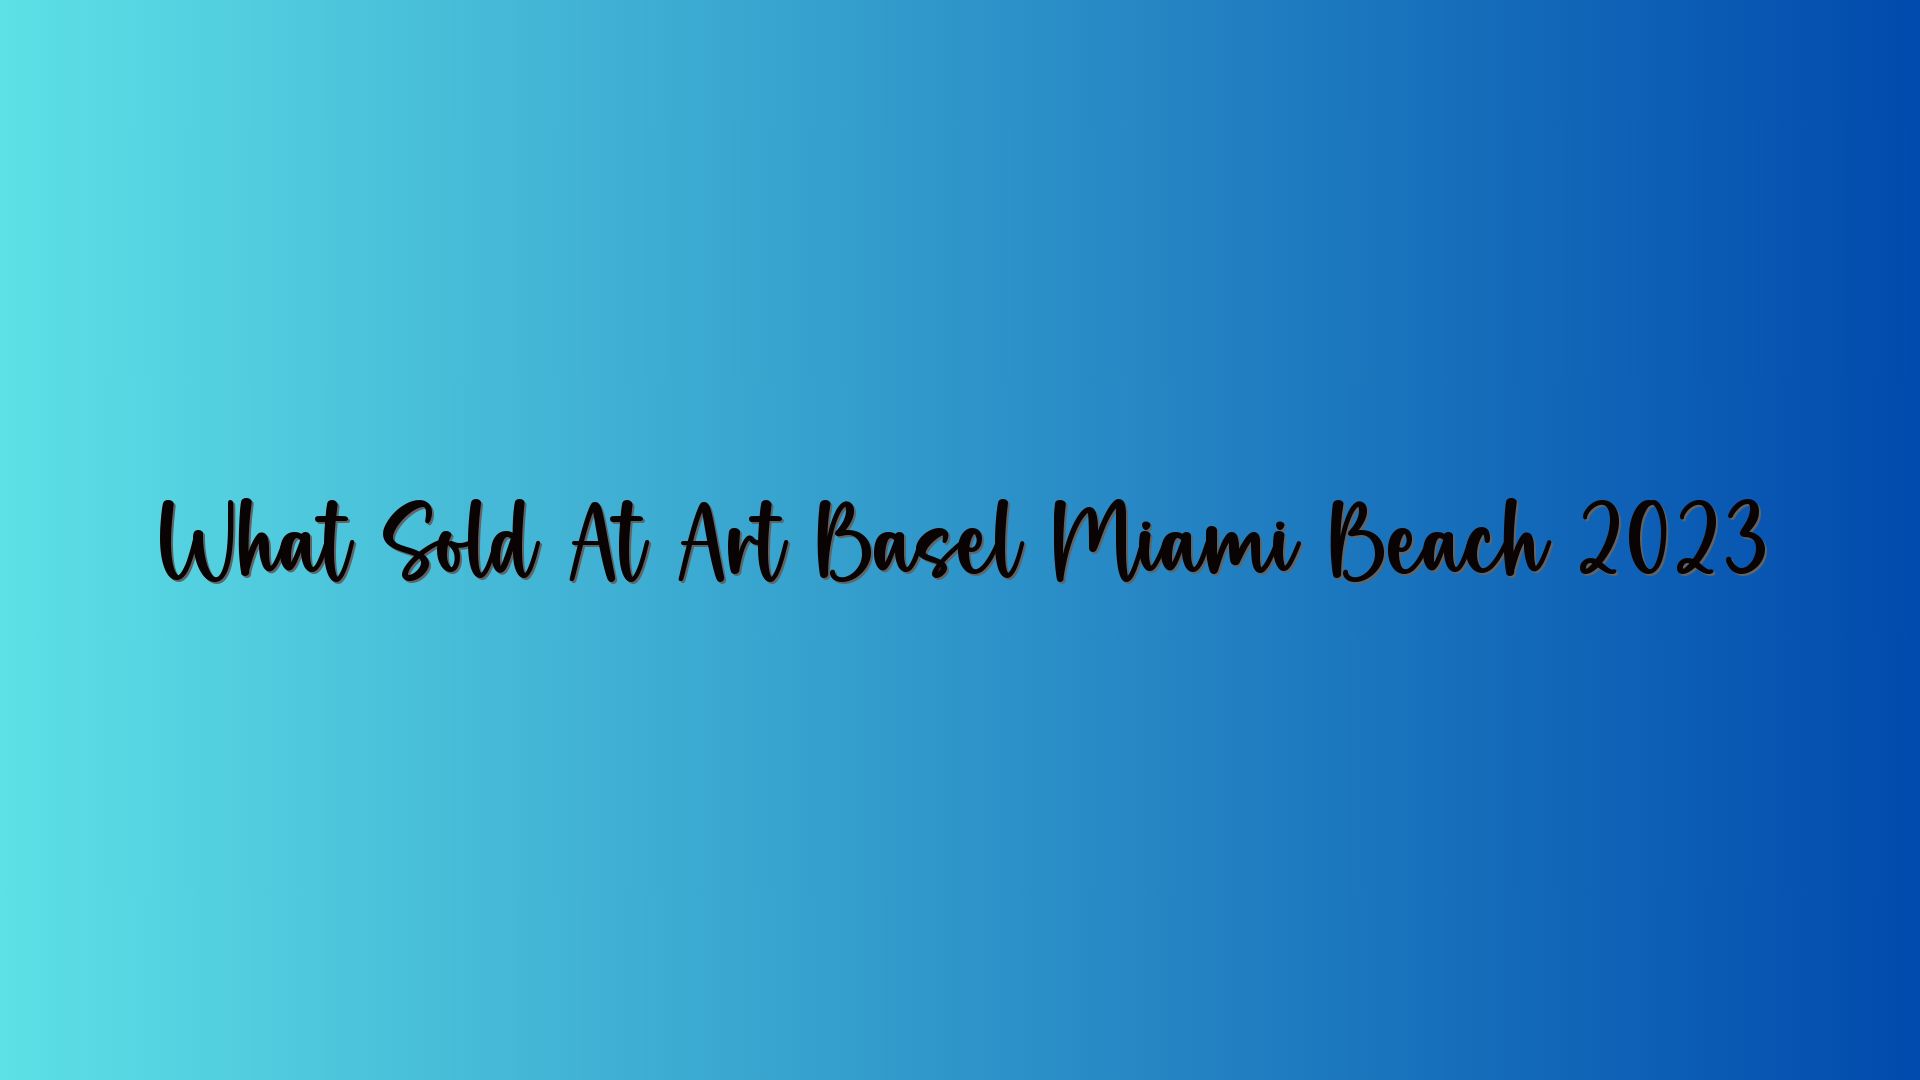 What Sold At Art Basel Miami Beach 2023